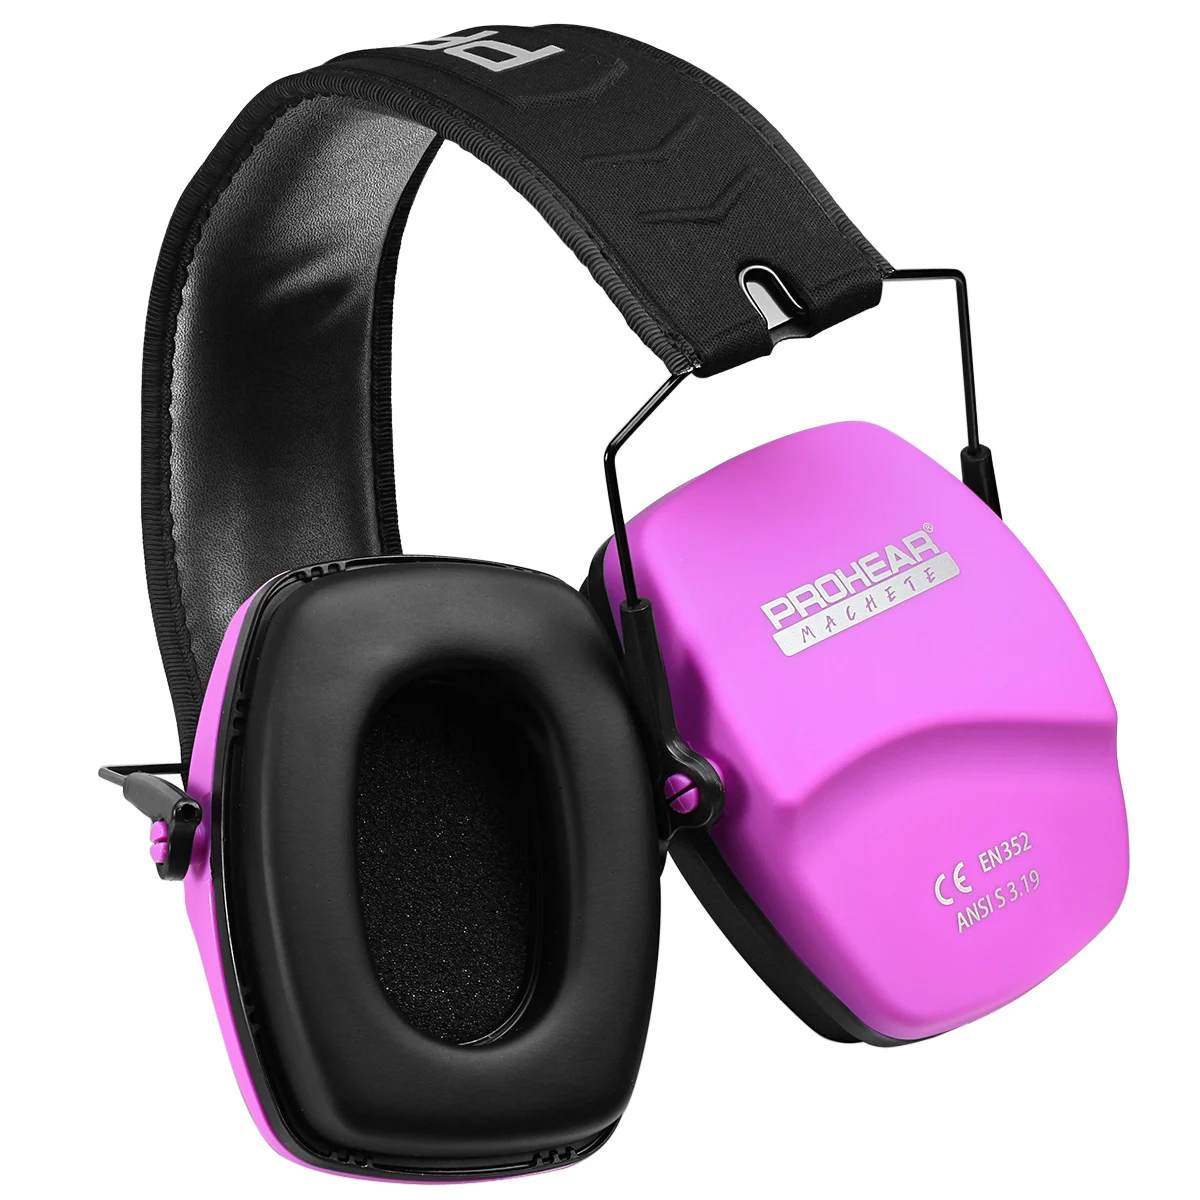 Noise Reduction Ear Muffs for Hunting Shooting Ear Protection Purple